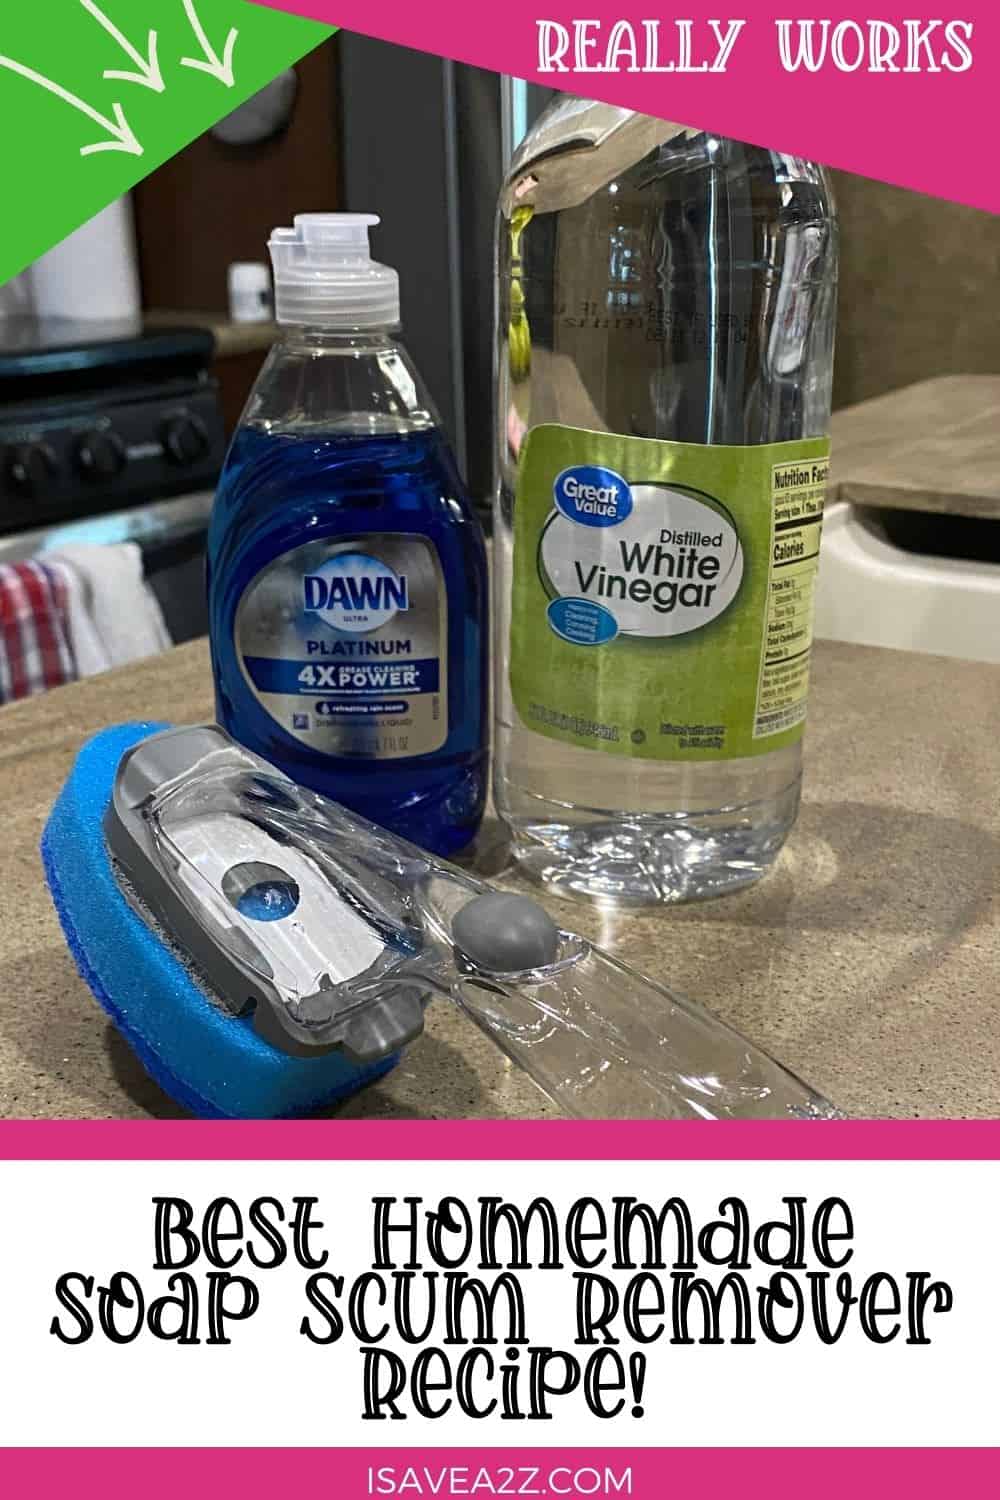 Best Homemade Soap Scum Remover EVER!!! Only 2 ingredients!